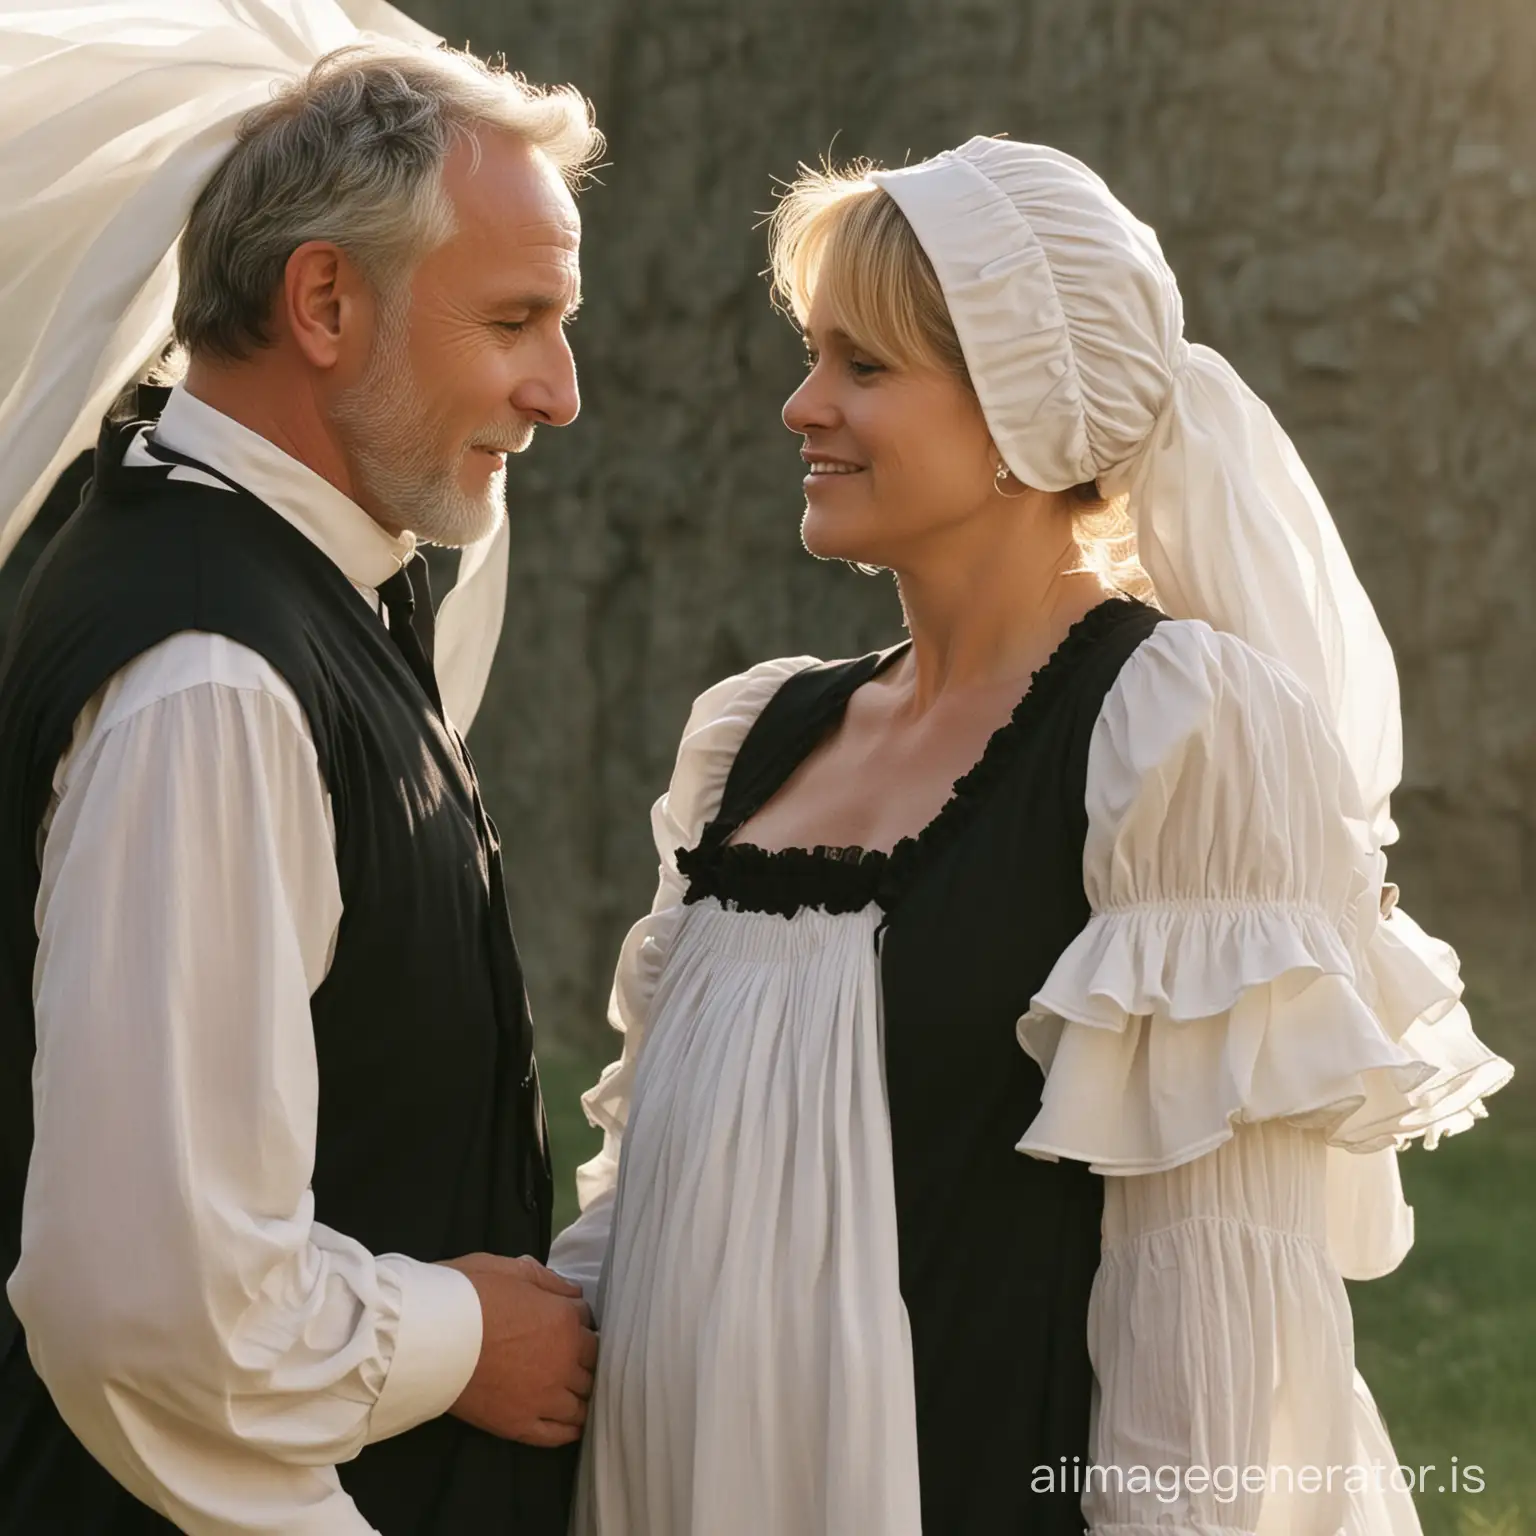 Samantha Carter from SG1  wearing a floor-length loose billowing amish black maternity maxi with an apron and a frilly white bonnet dress kissing an old man who seems to be her newlywed husband